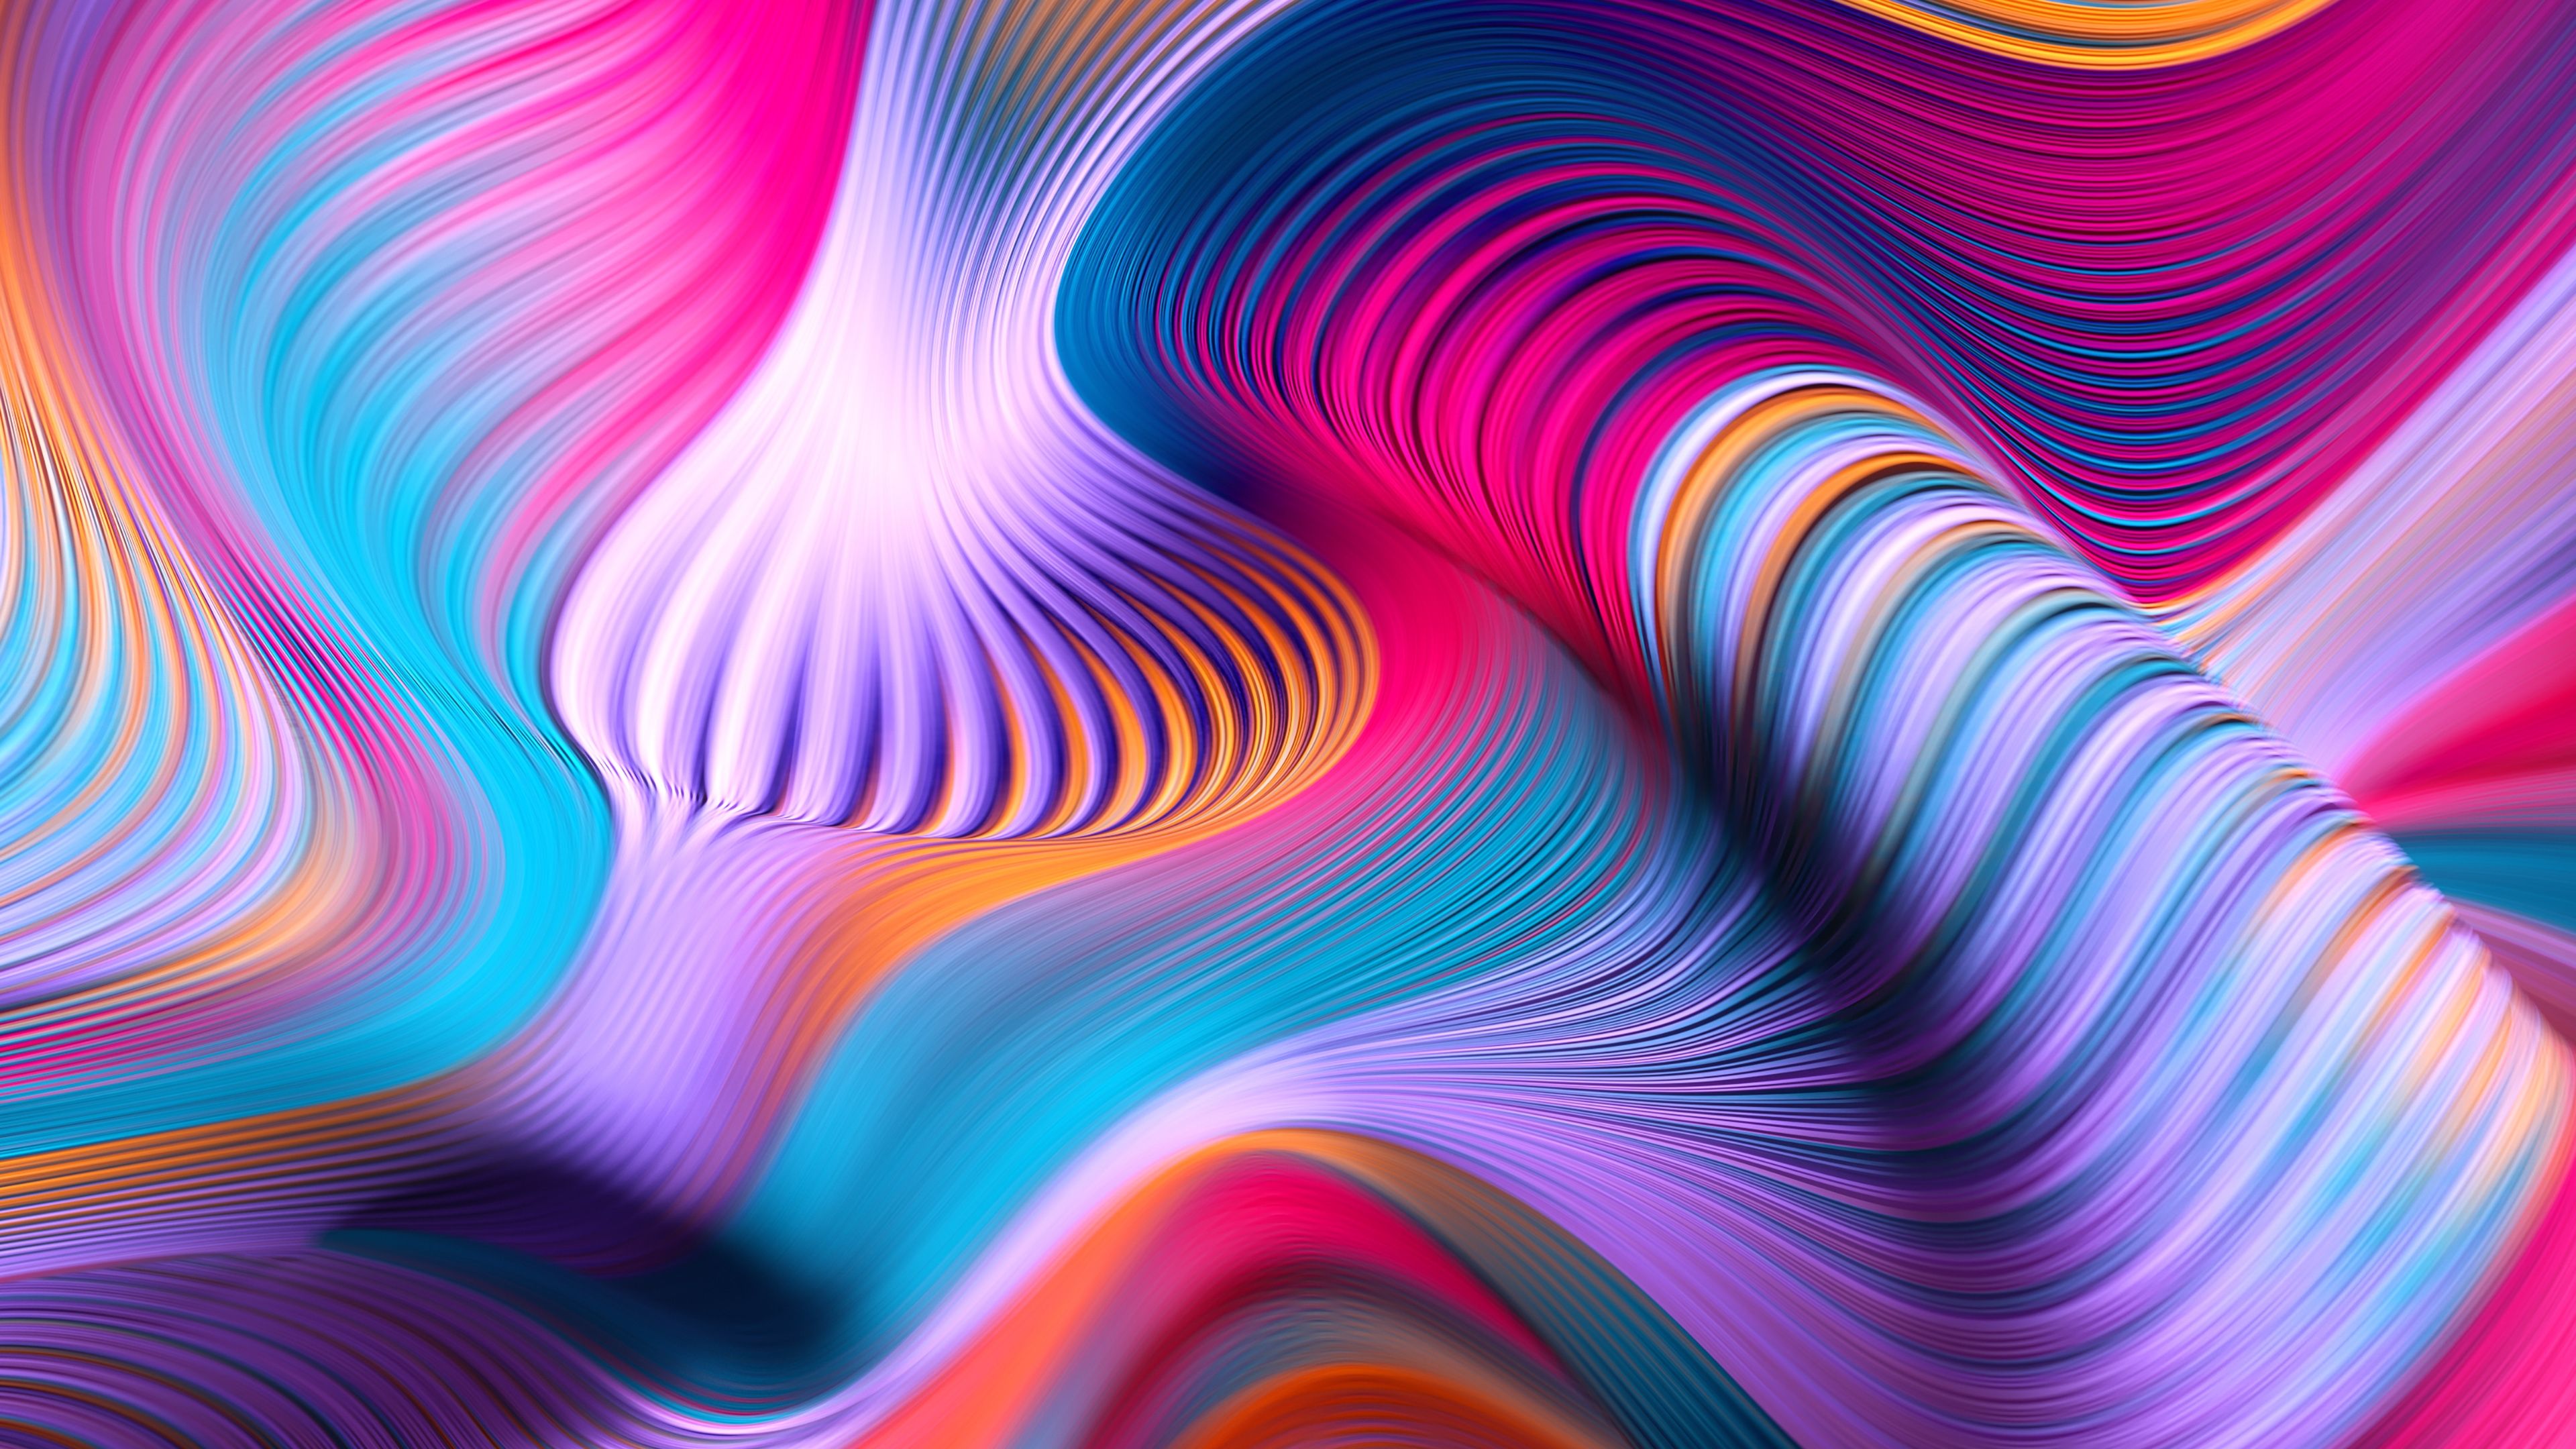 Descargar 3840x2160 Colorful Waves, Nested, Spiral Wallpapers para UHD